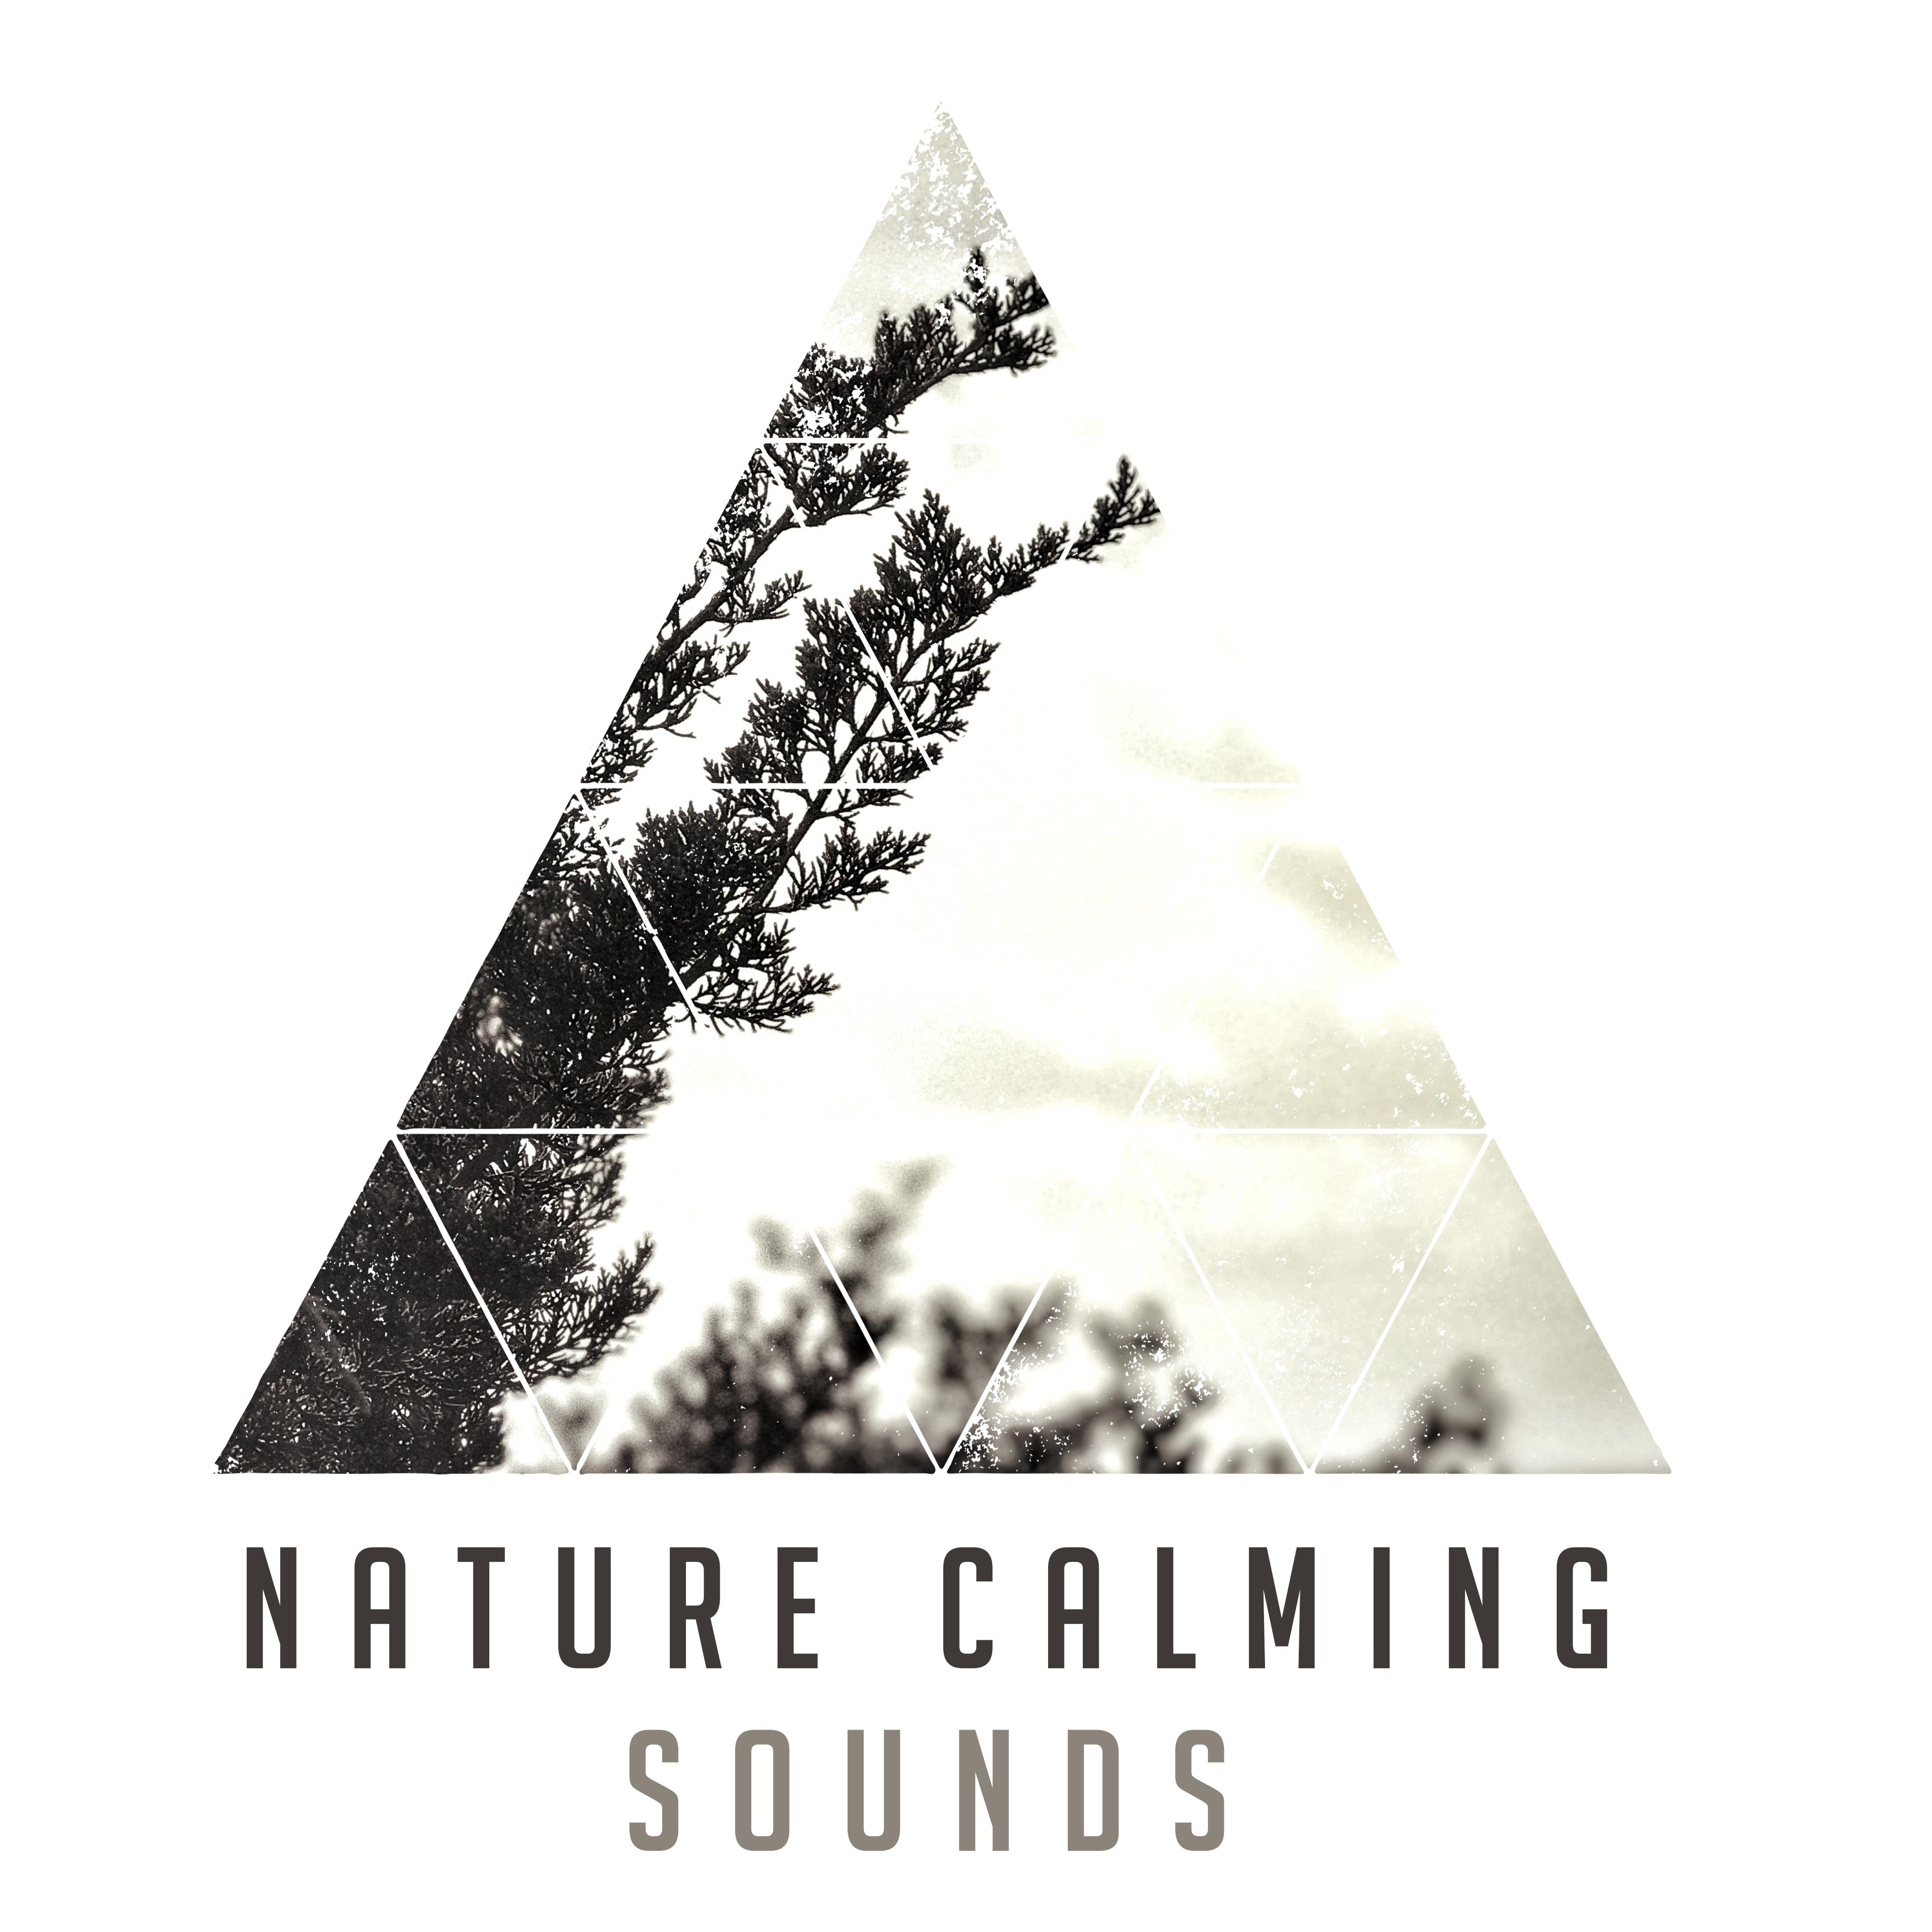 Nature Calming Sounds – Soothing Waves of Calmness, Peaceful Spirit, Nature Sounds